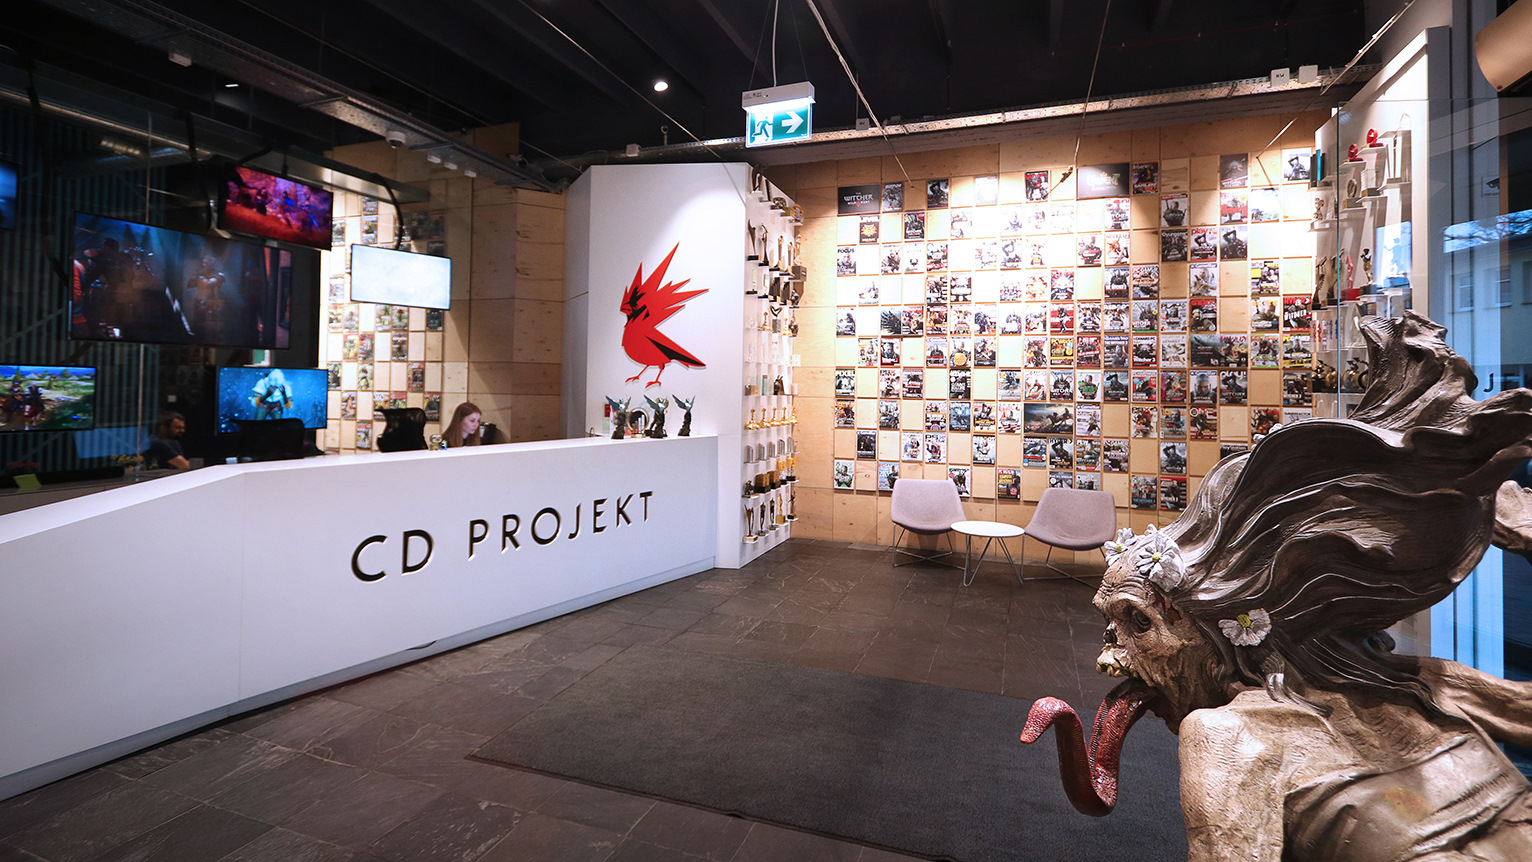 The reception area at CD Projekt's office in Warsaw, Poland. (Photo: CD Projekt)